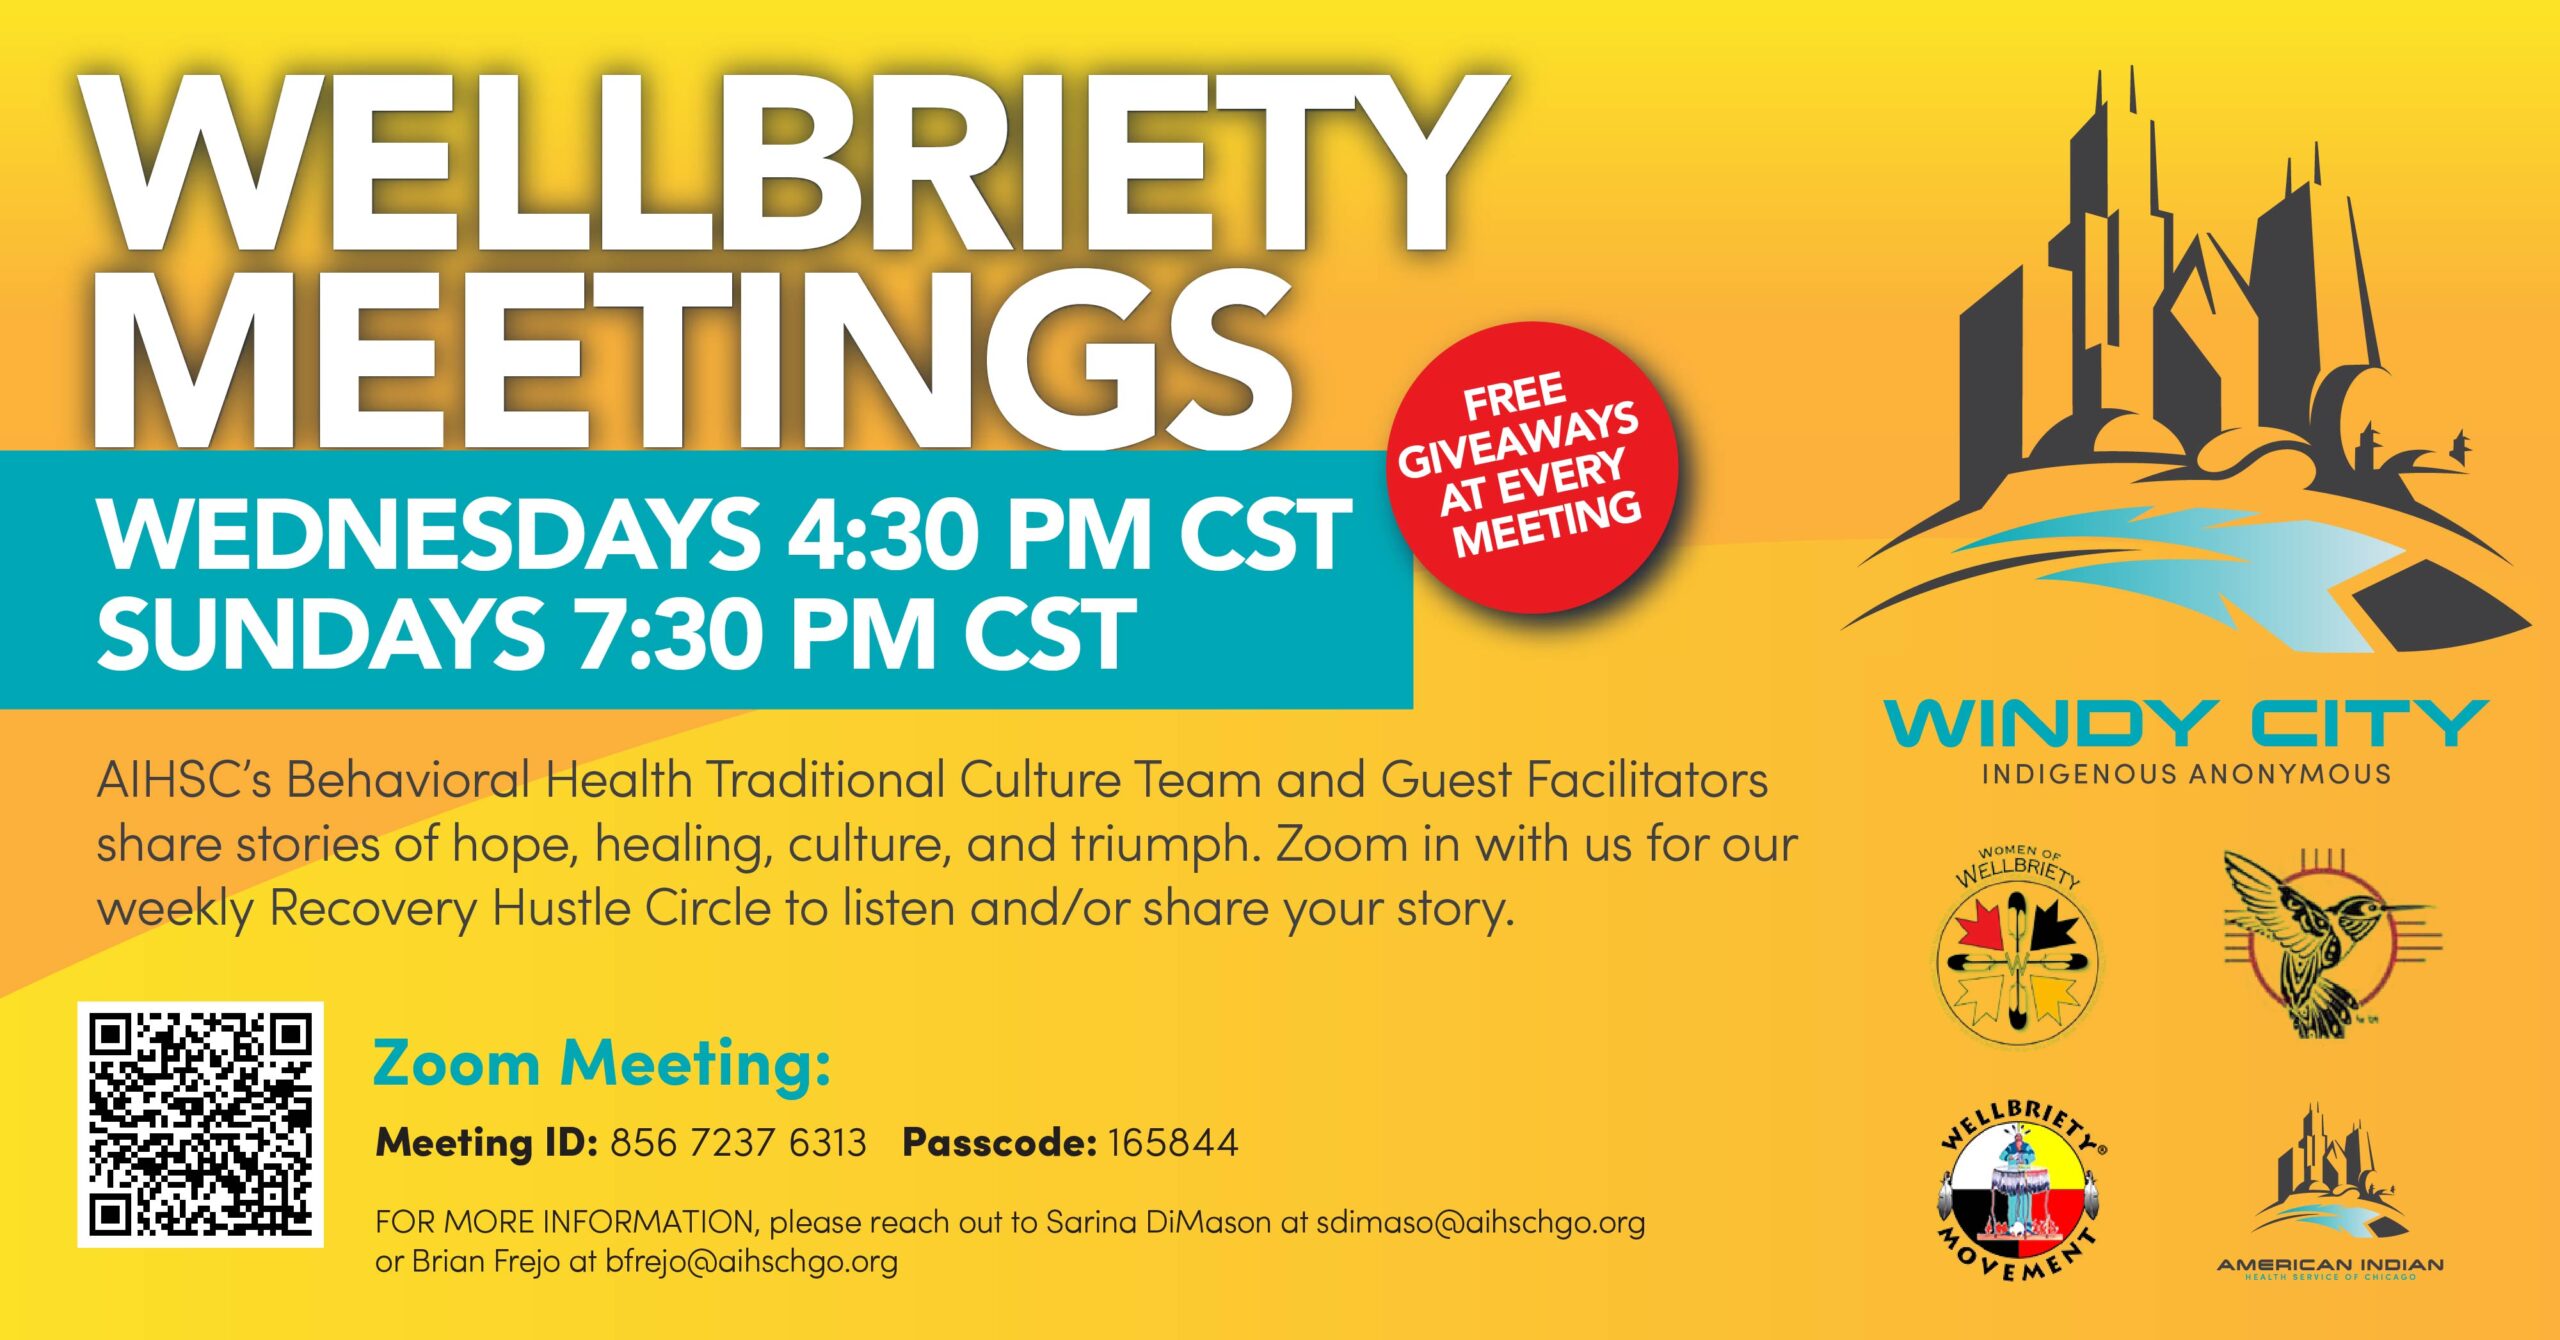 Wellbriety Meetings Windy CIty Indigenous Anonymous and American Indian Health Service of Chicago